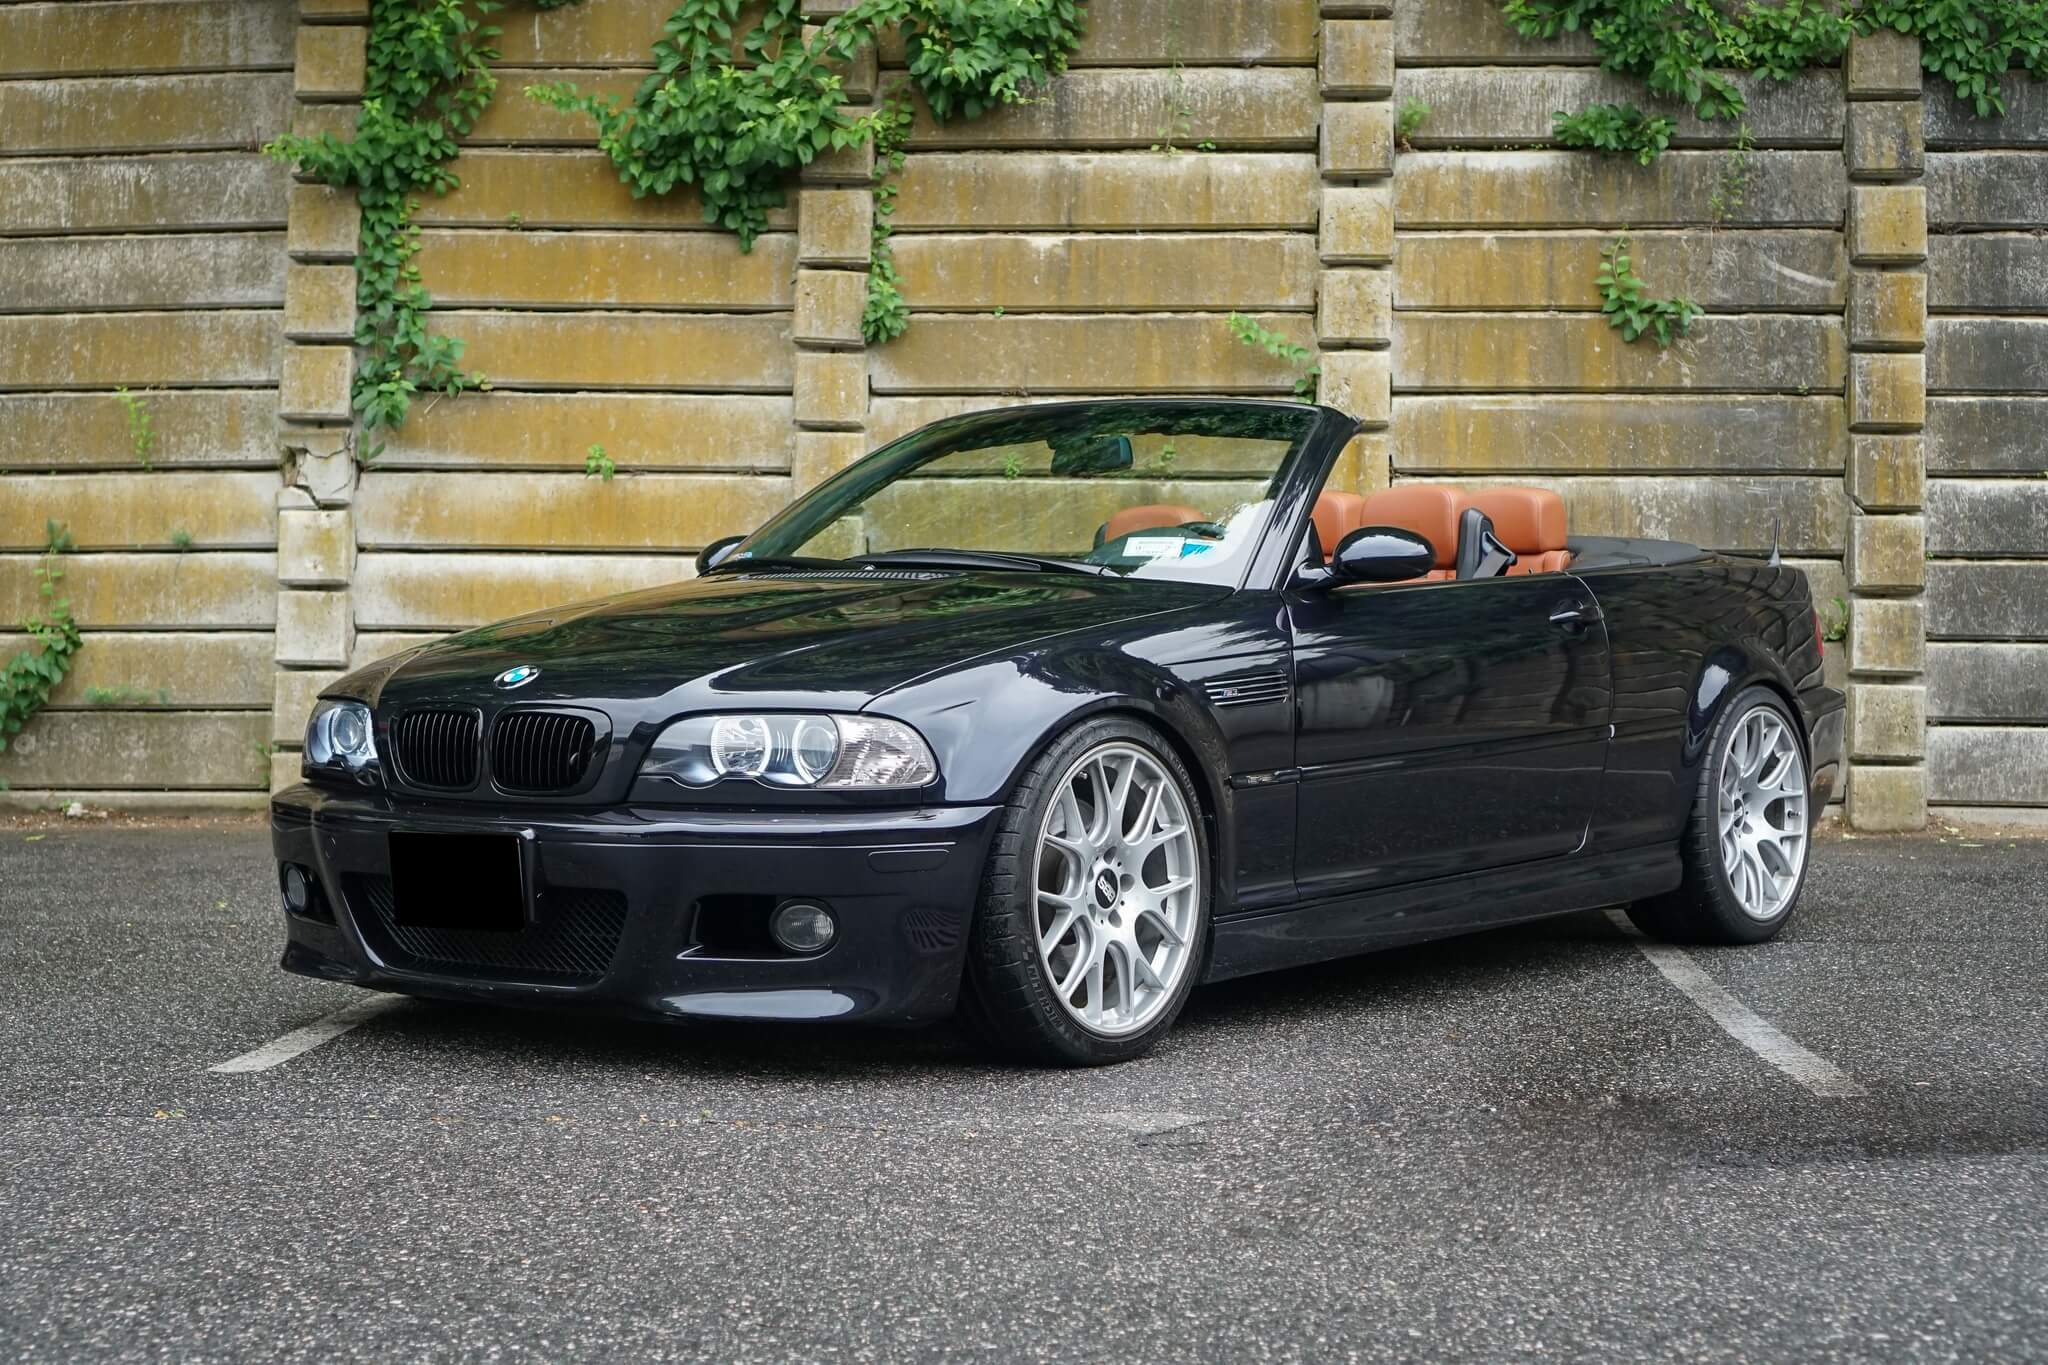  45k-Mile 2004 BMW E46 M3 Convertible 6-Speed SMG